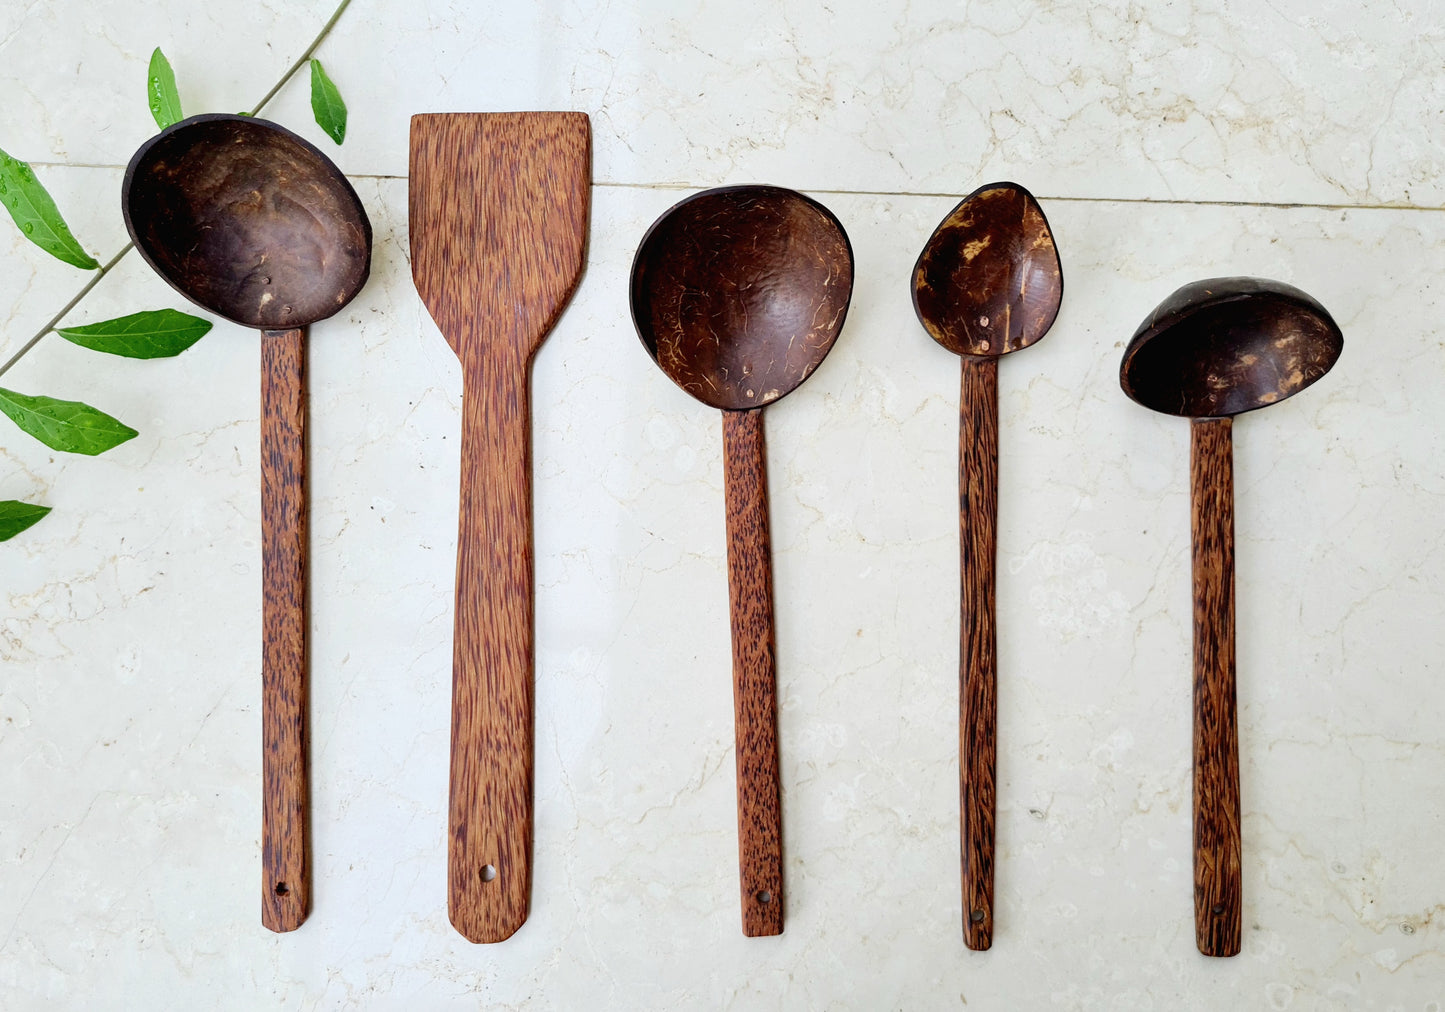 Thenga Traditional Coconut Shell & Wood Cooking Set | Set of 5-1 Spatula, 1 Large Spoon, 3 Size Ladles